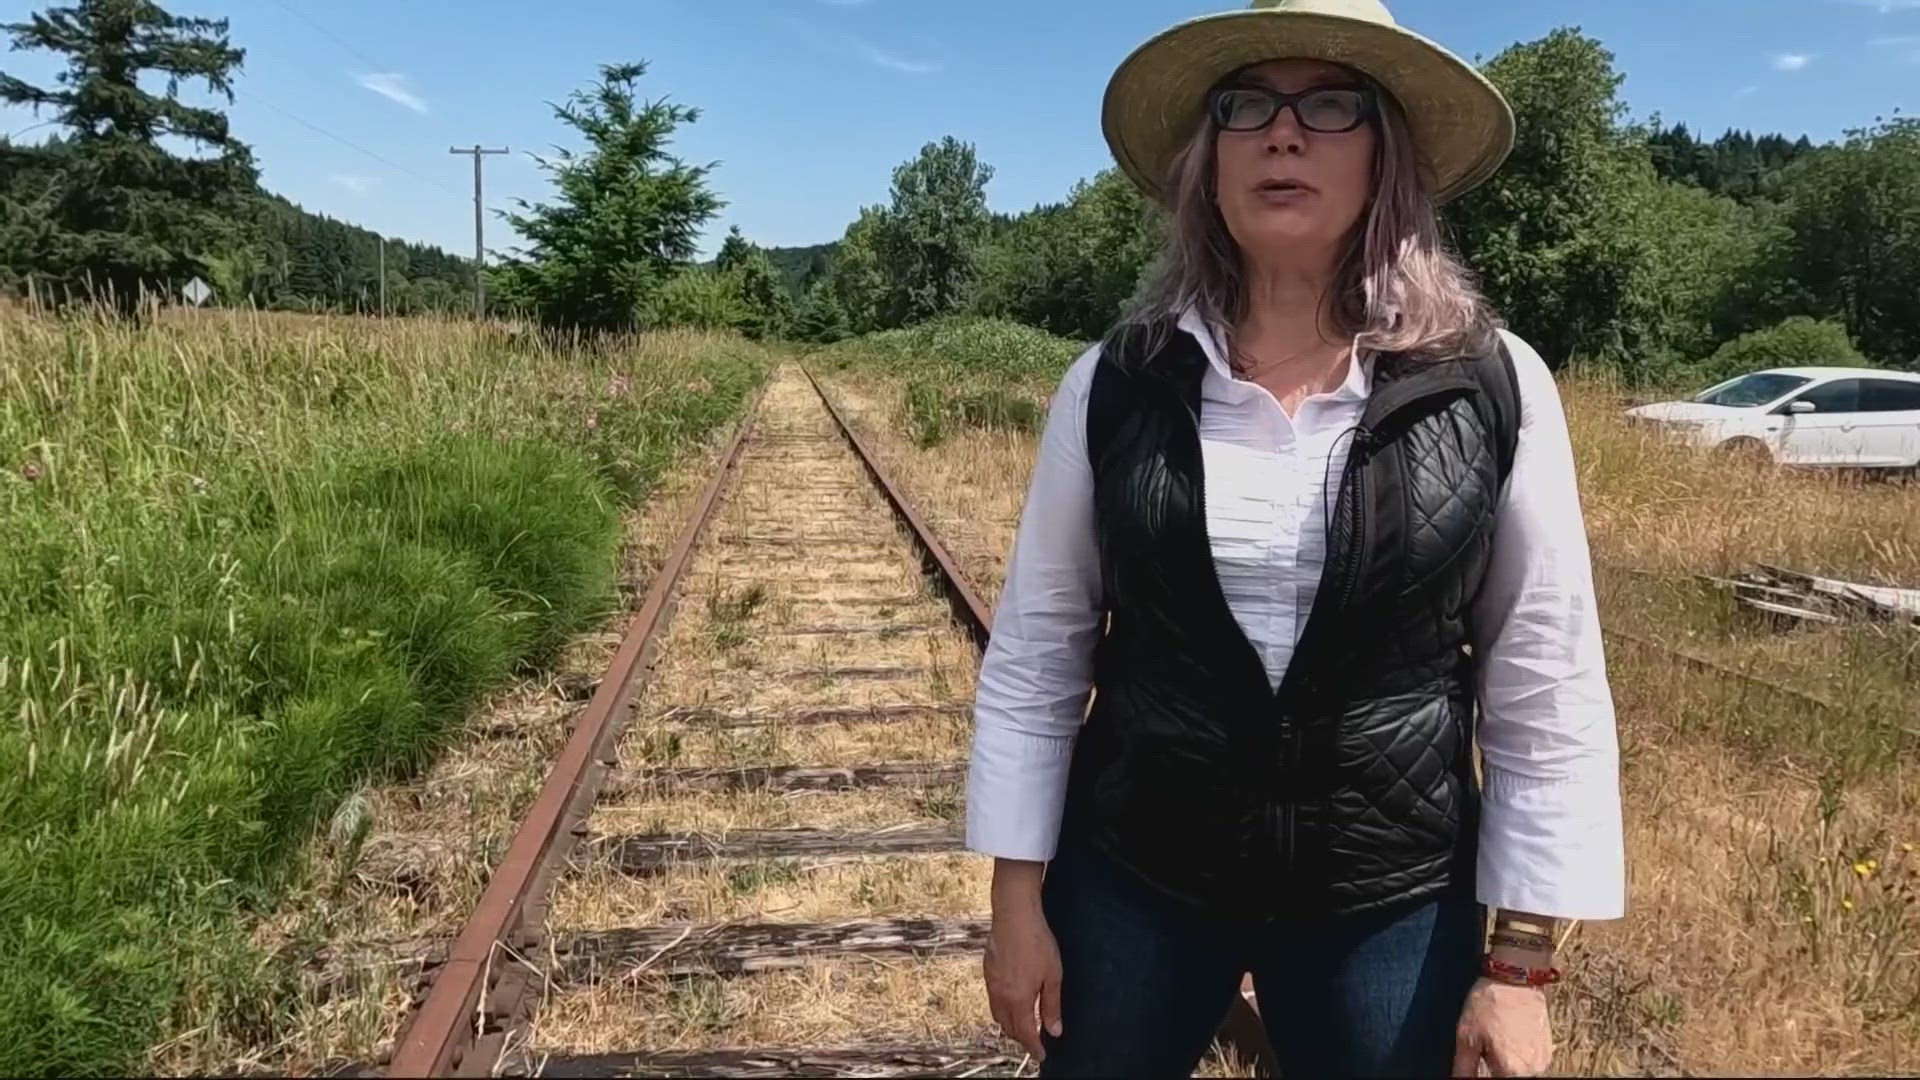 The plan is to convert an abandoned railroad line between Washington and Tillamook counties into a trail, but it needs funding and volunteers.